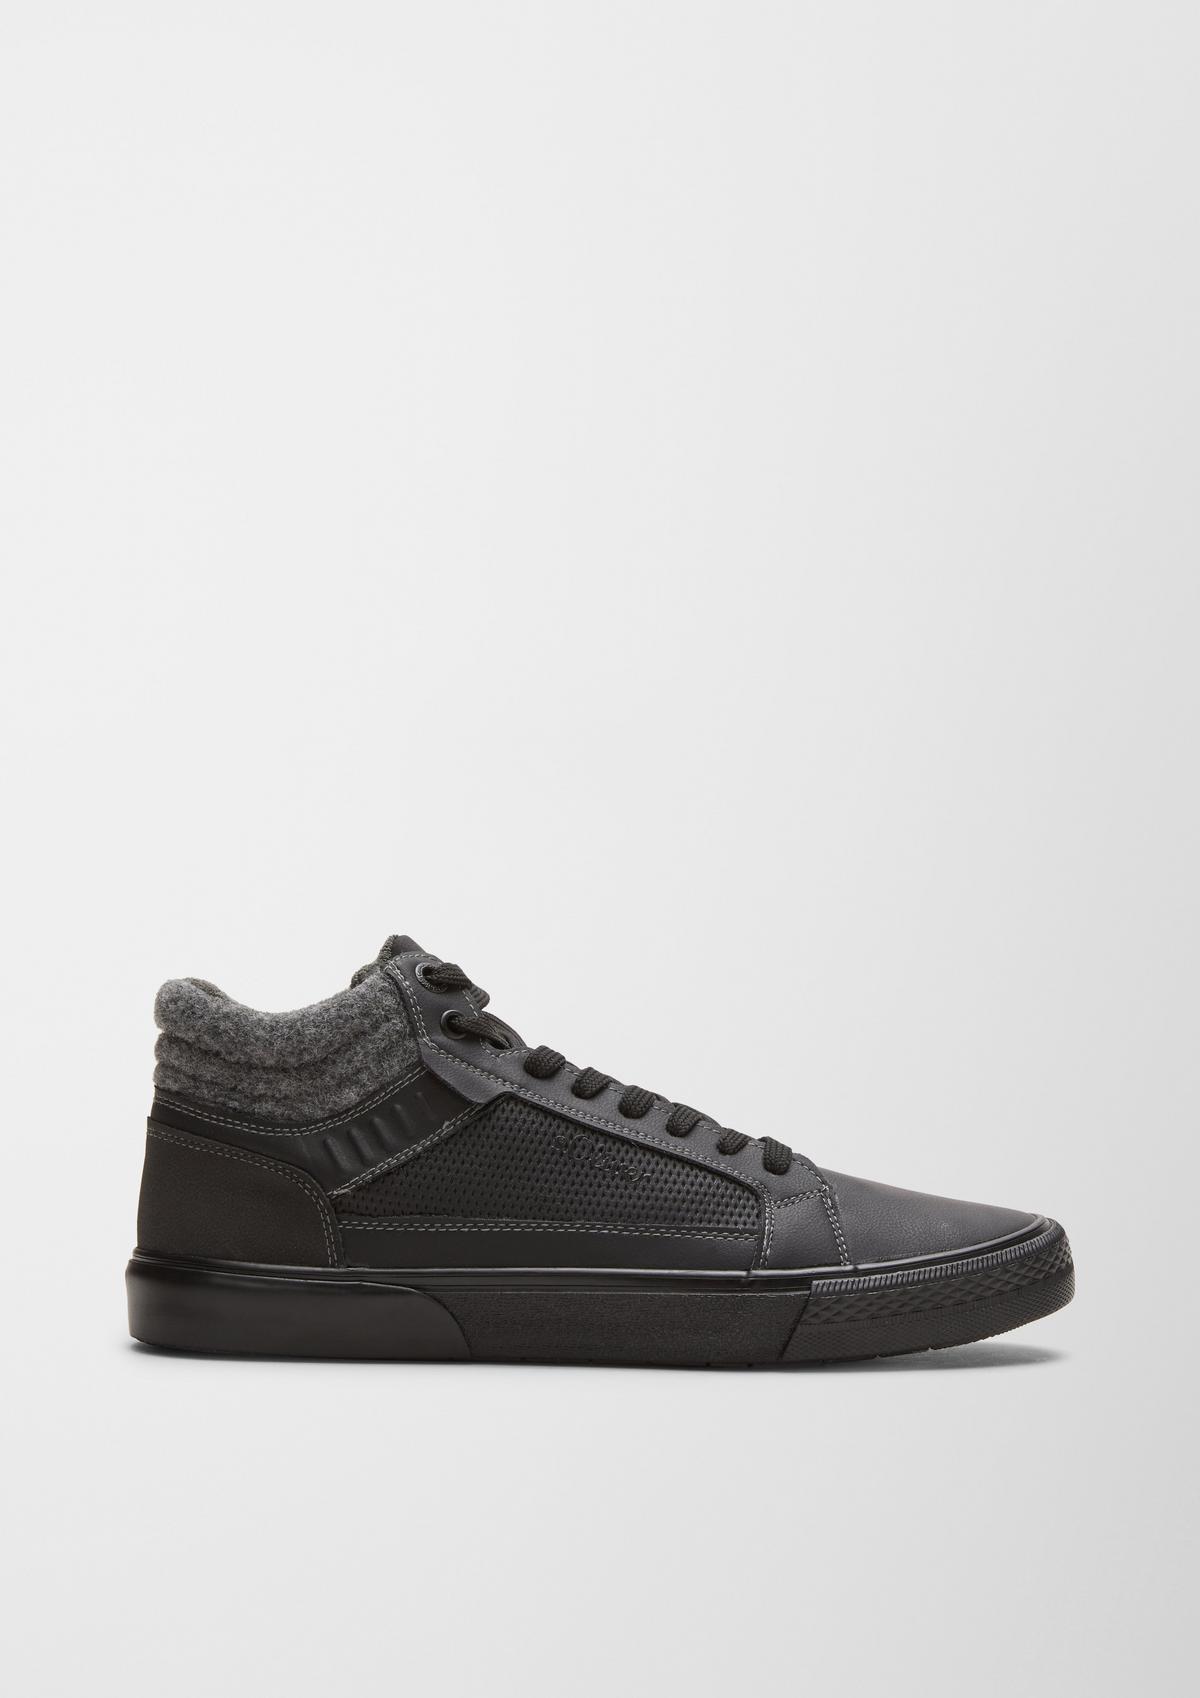 s.Oliver High Sneaker im Materialmix